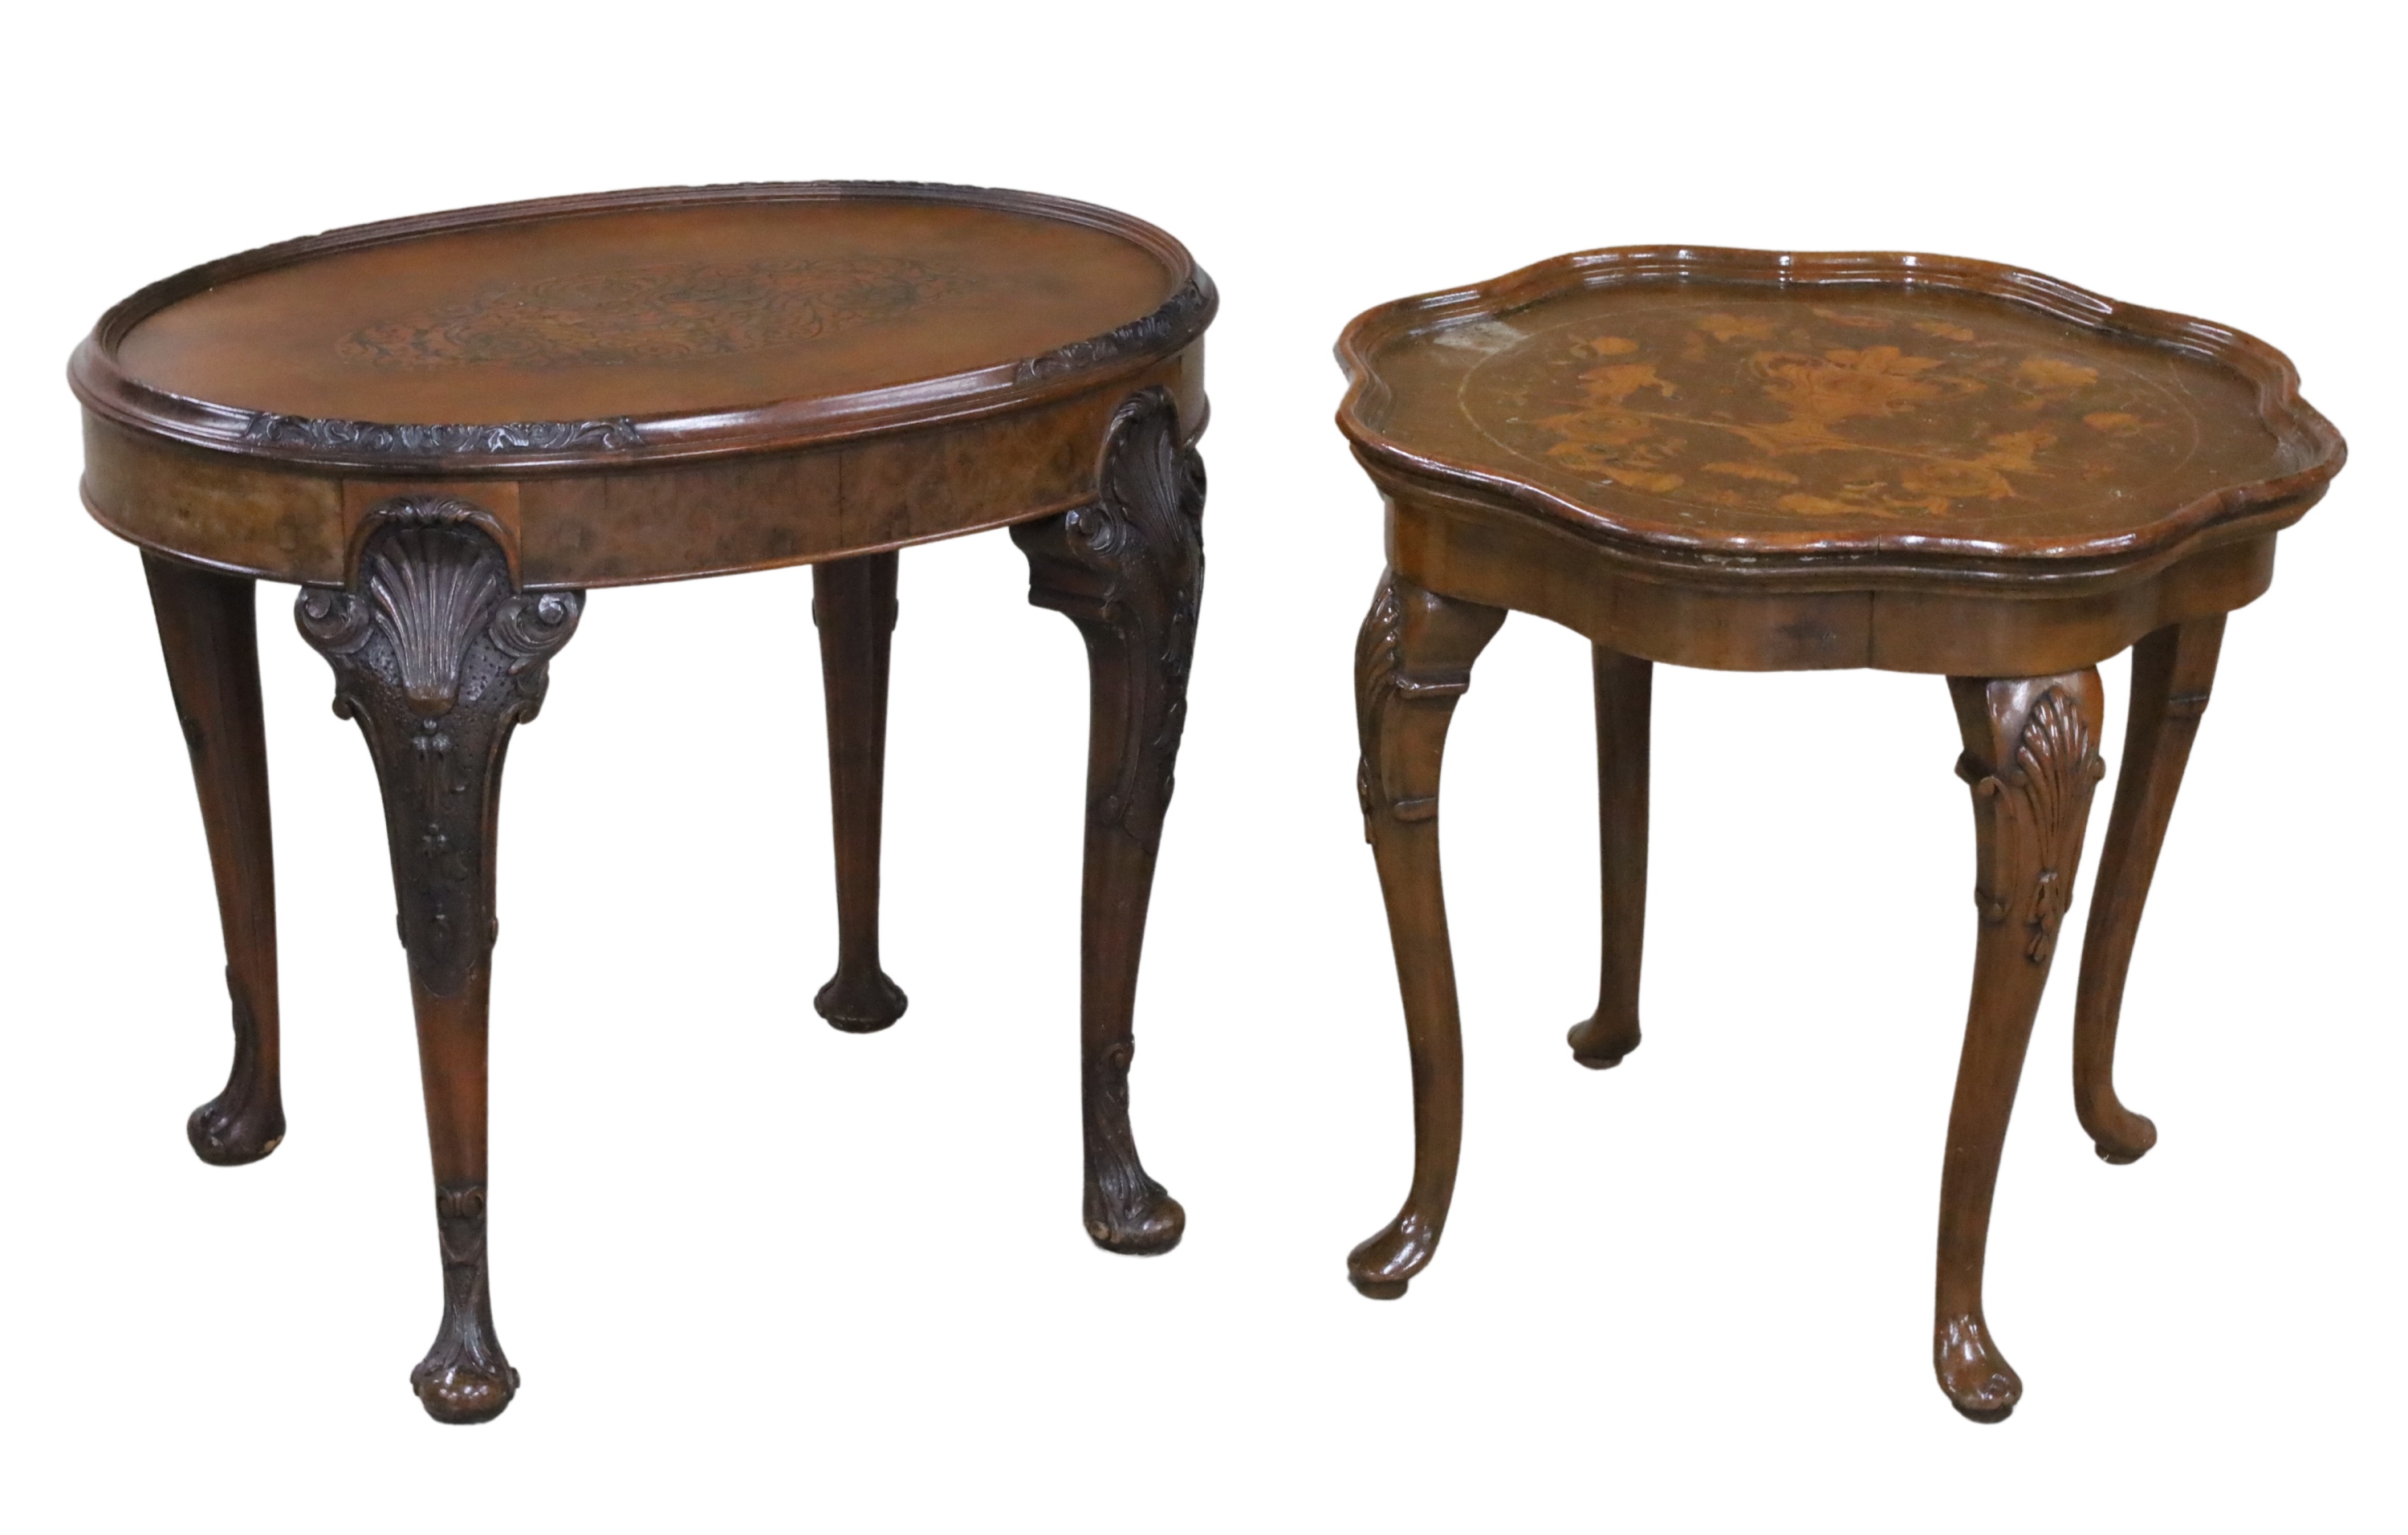 GROUP OF 2 QUEEN ANNE STYLE TABLES 2f8d6b